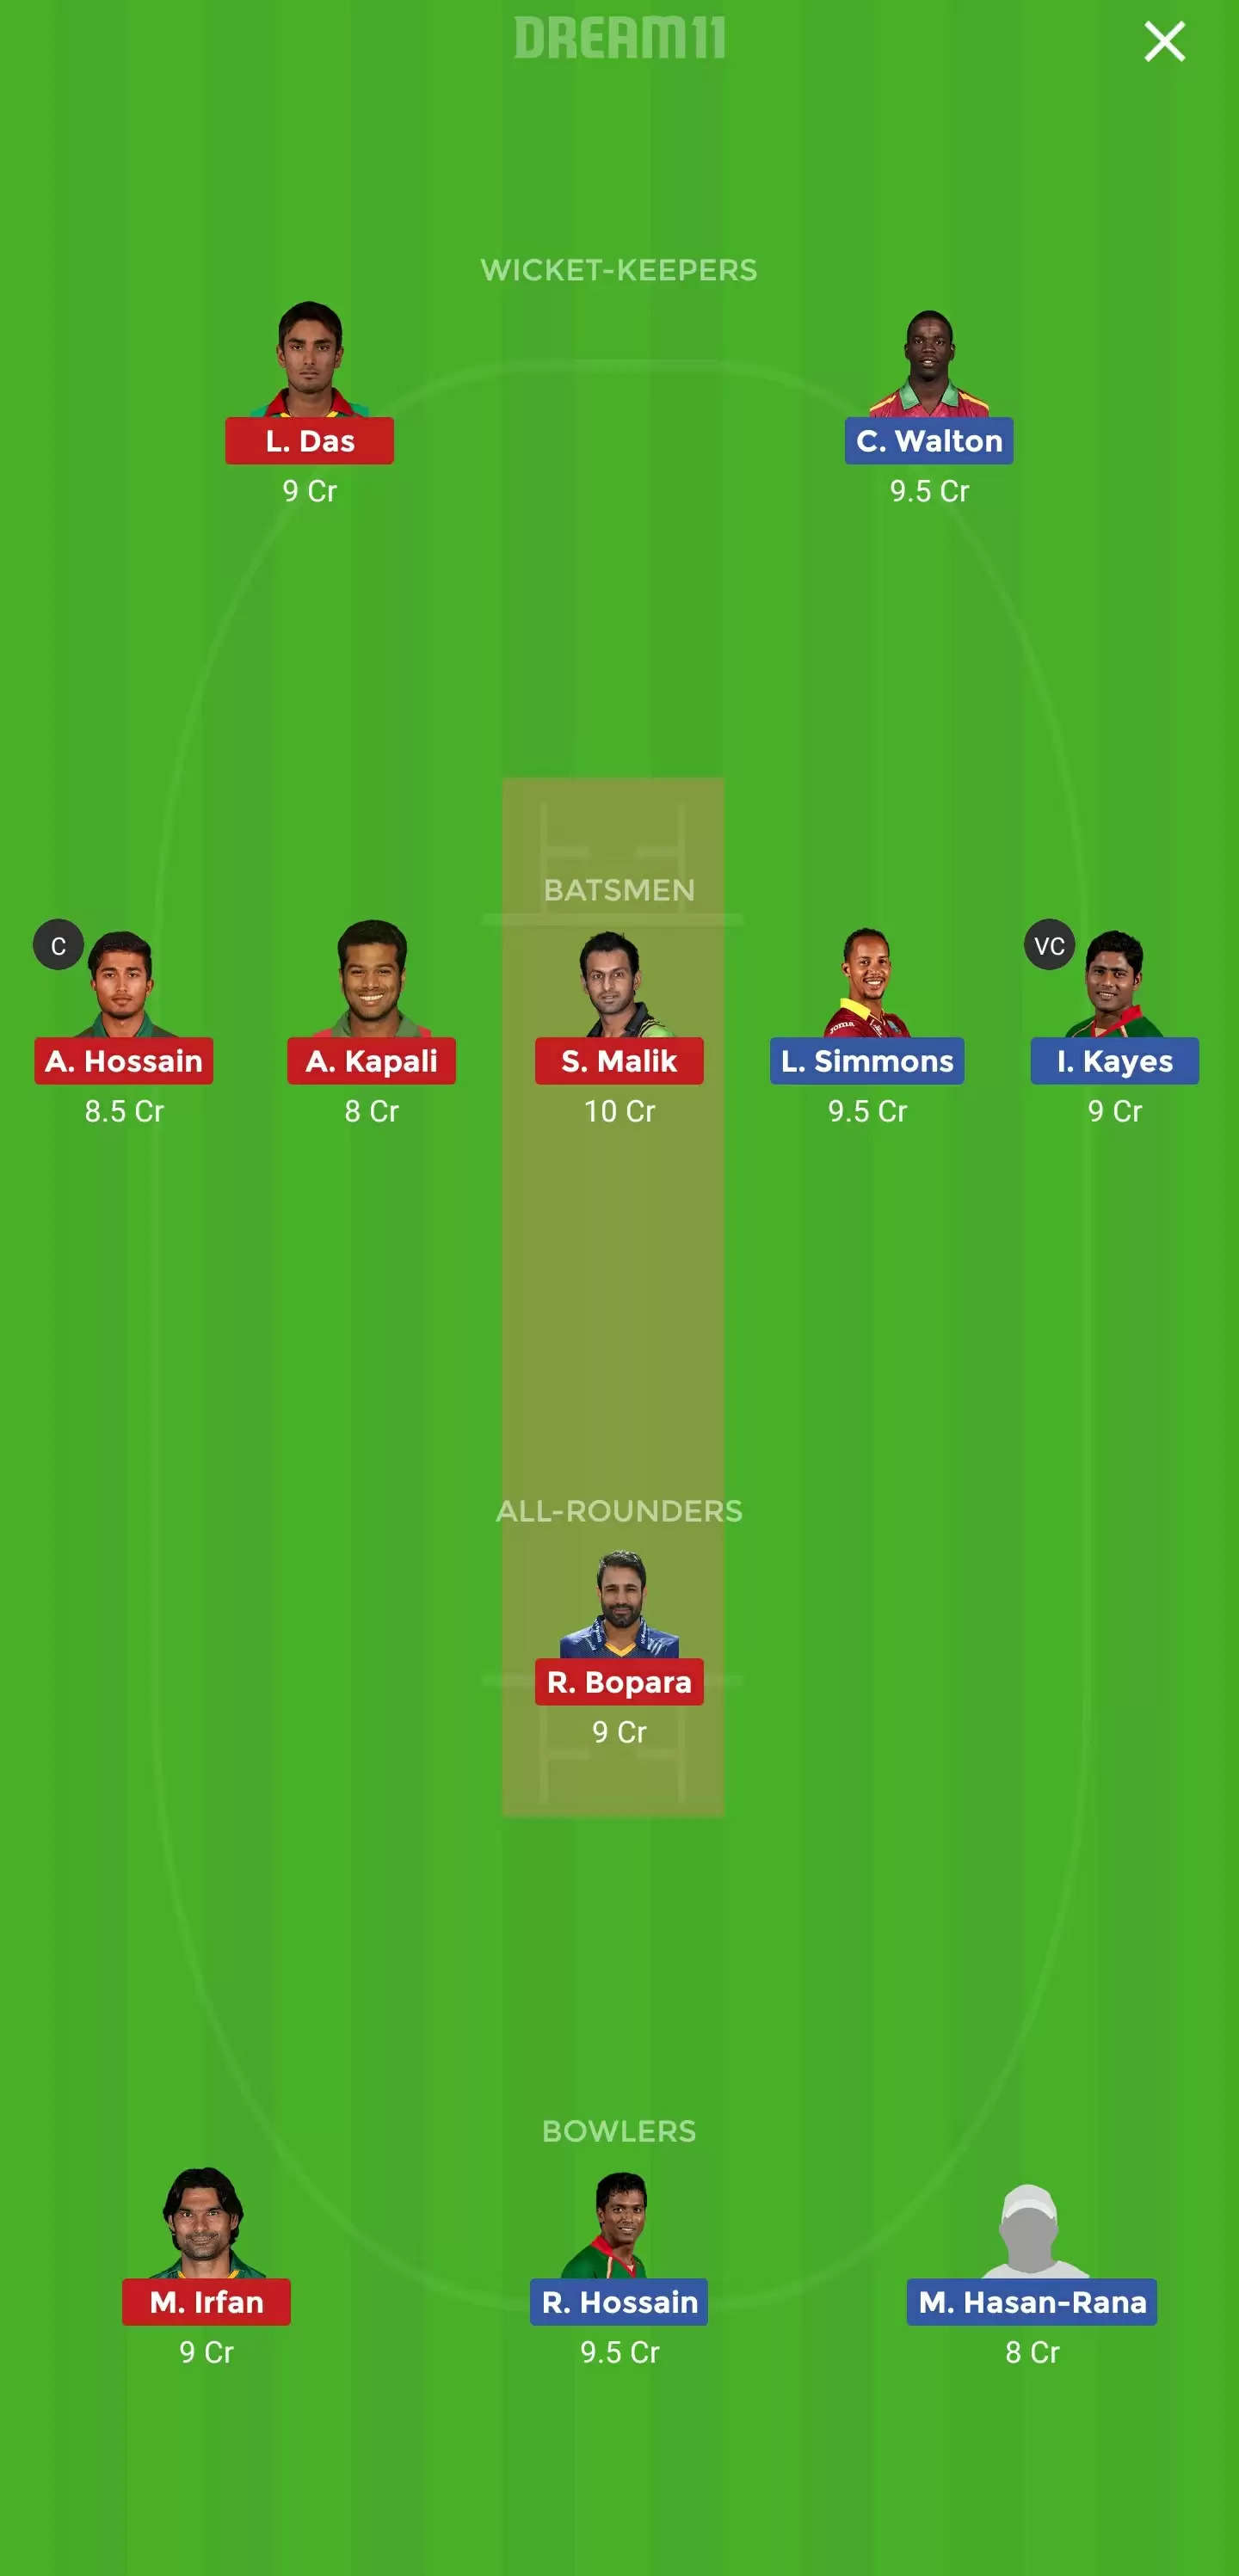 BPL 2019/20: CCH vs RAR Dream11 Fantasy Cricket Prediction & Tips, Match 36: Chattogram Challengers vs Rajshahi Royals Playing XI, Dream11 Team, Pitch Report and Weather Update